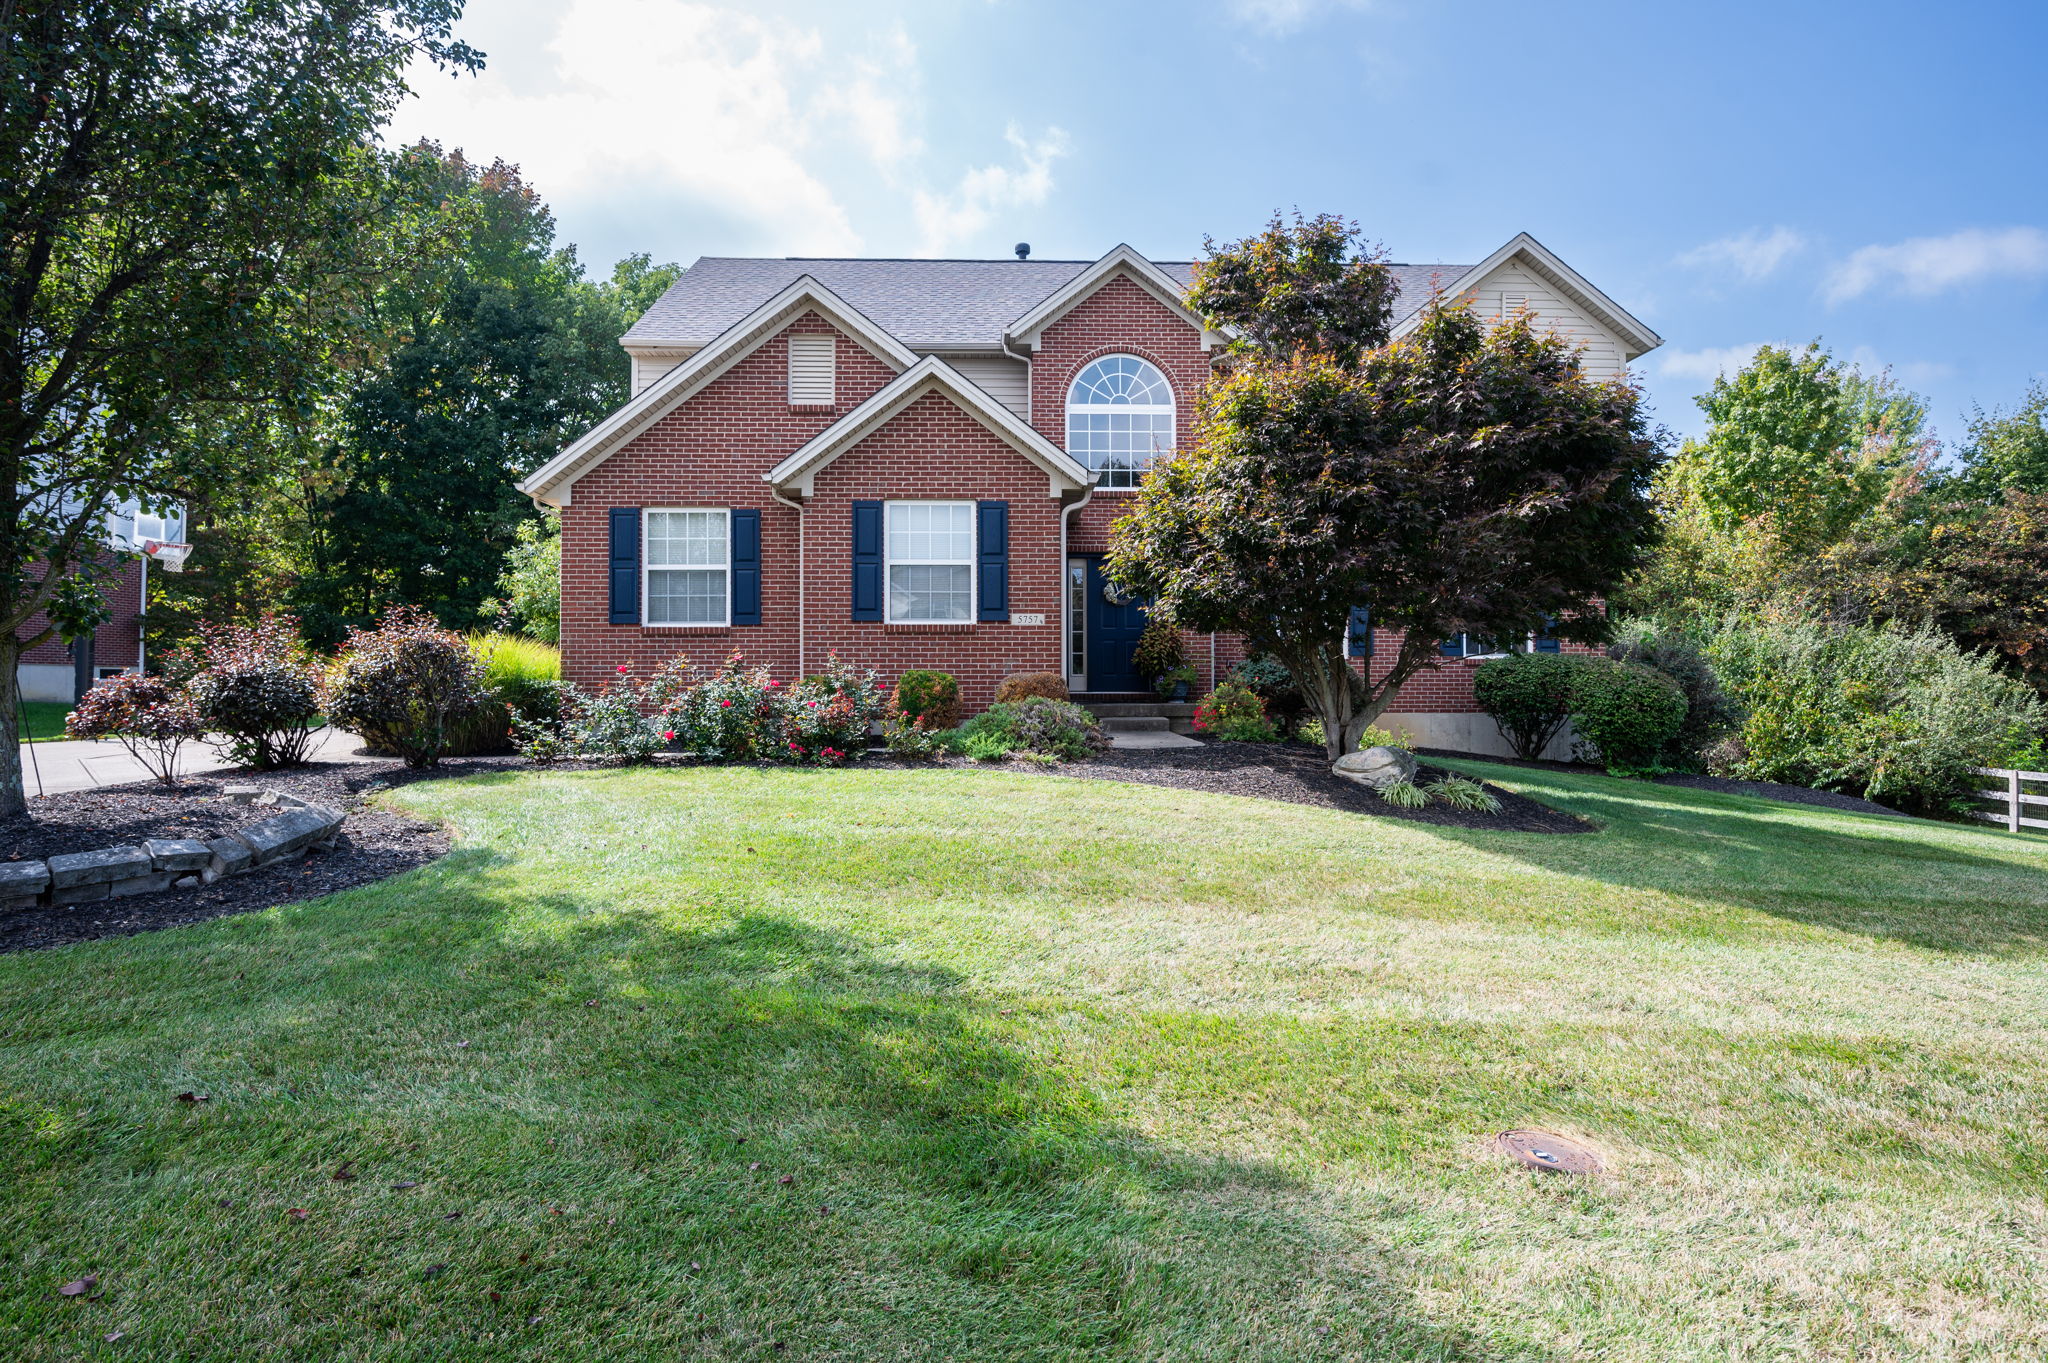 5757 Cedarview Ct, Middletown_CincyPhotoPro-2136